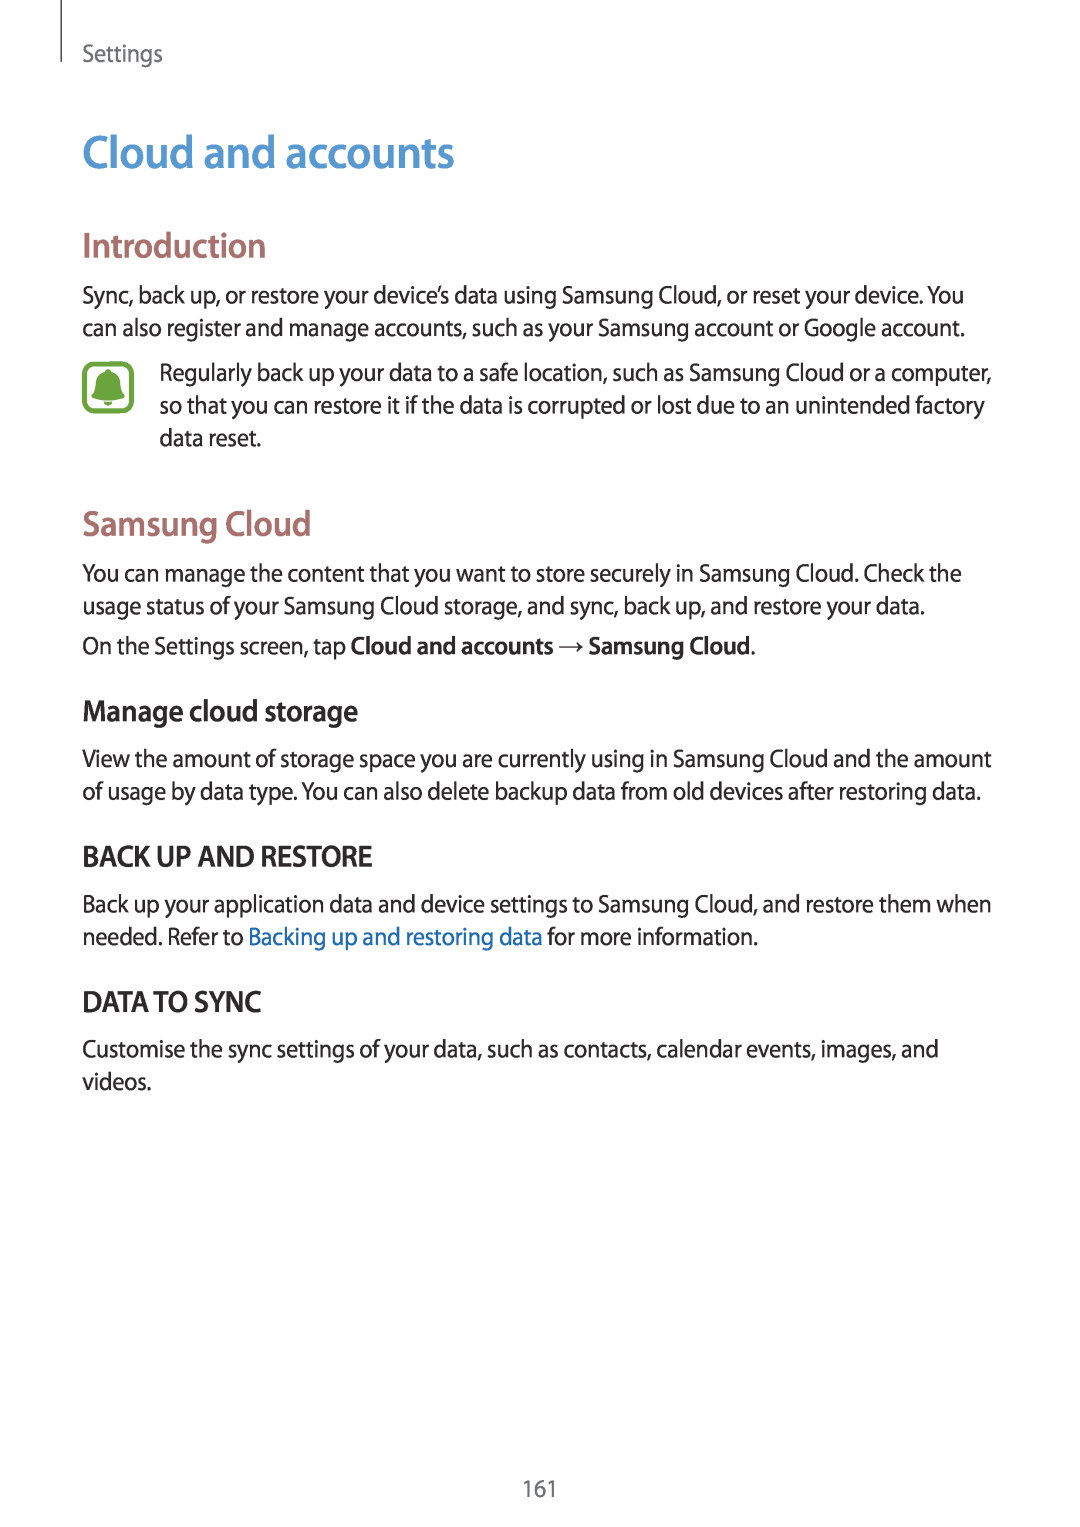 Samsung SM-G925FZKANEE manual Cloud and accounts, Samsung Cloud, Manage cloud storage, Back Up And Restore, Data To Sync 